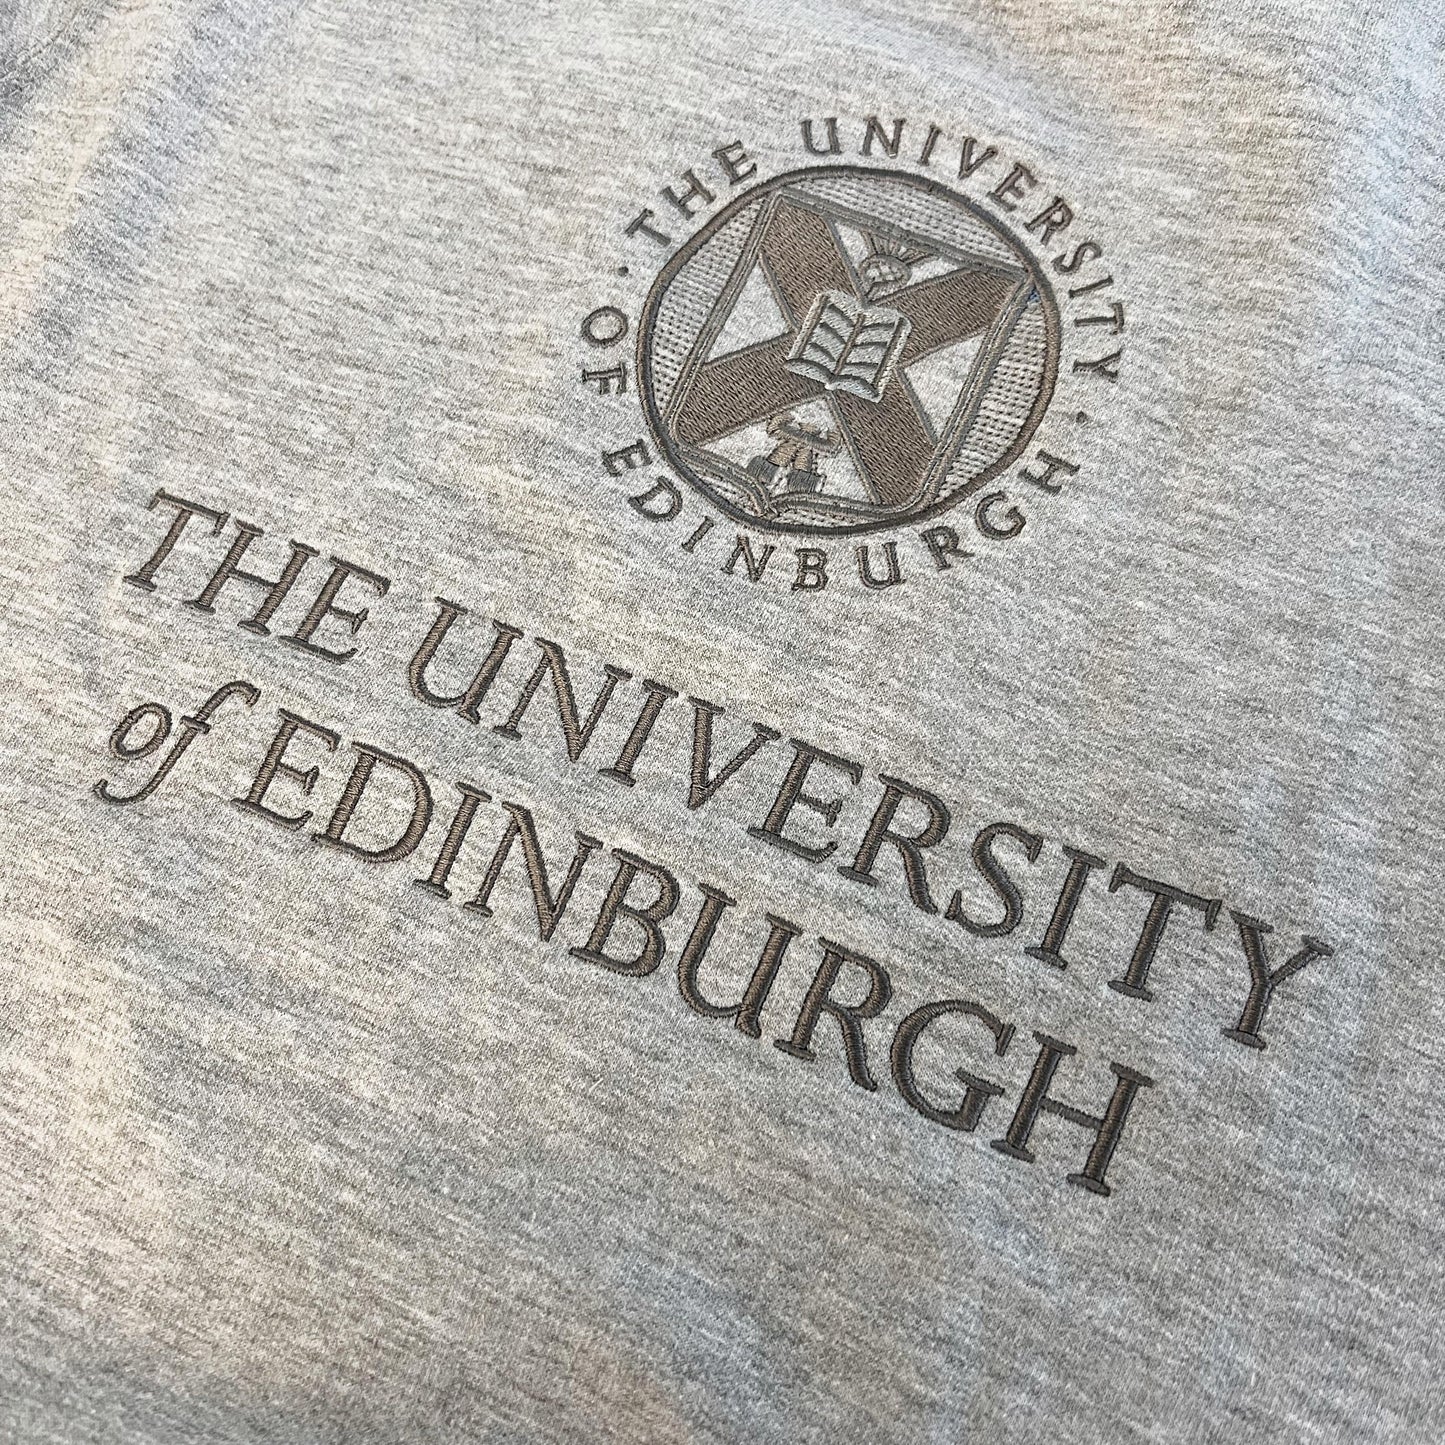 Close up image of the tonal embroidery of the University crest on a grey sweatshirt